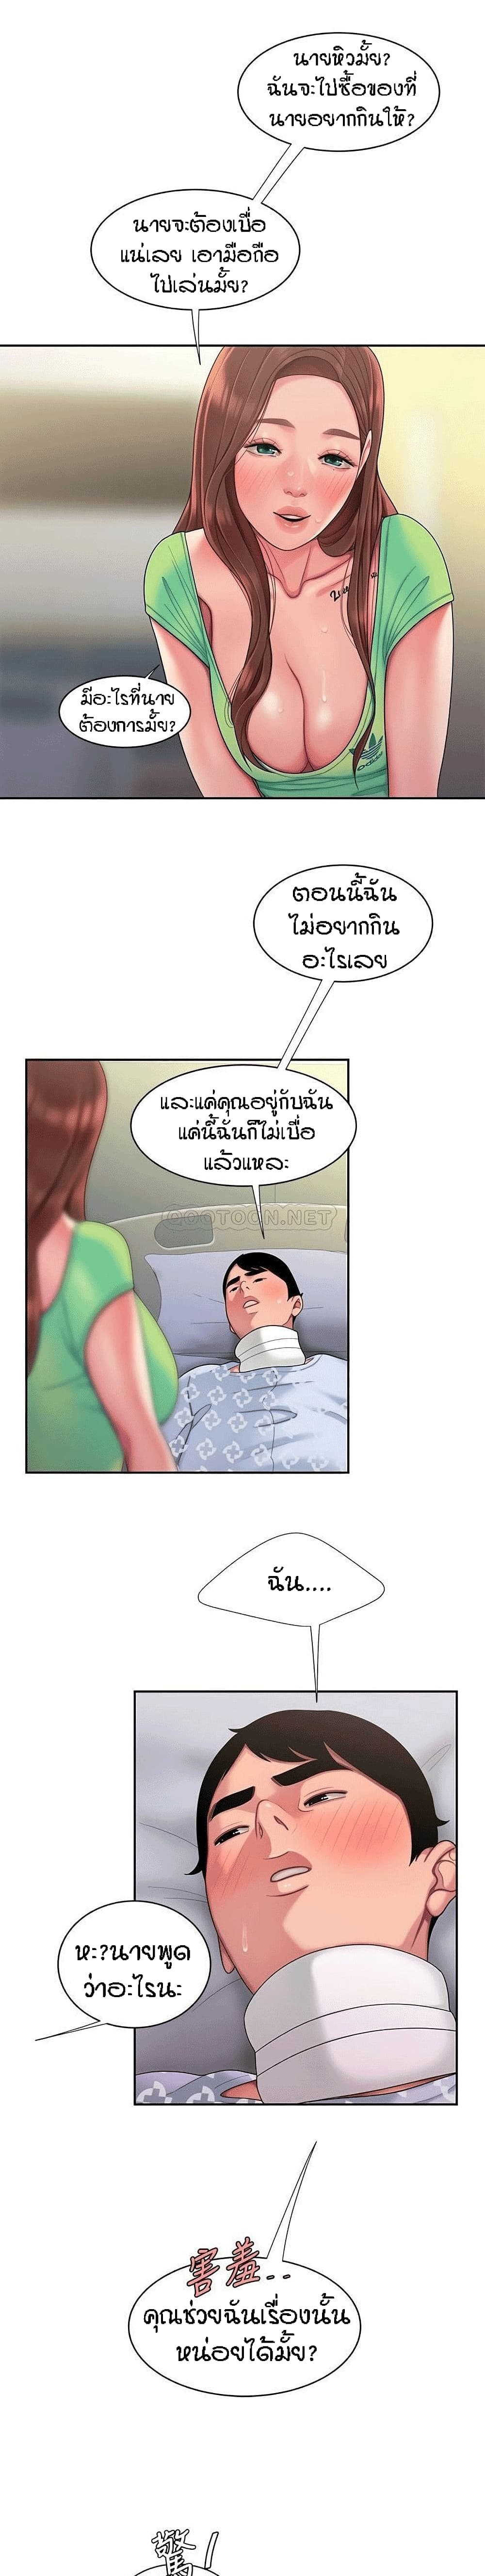 Delivery Man 53 (16)